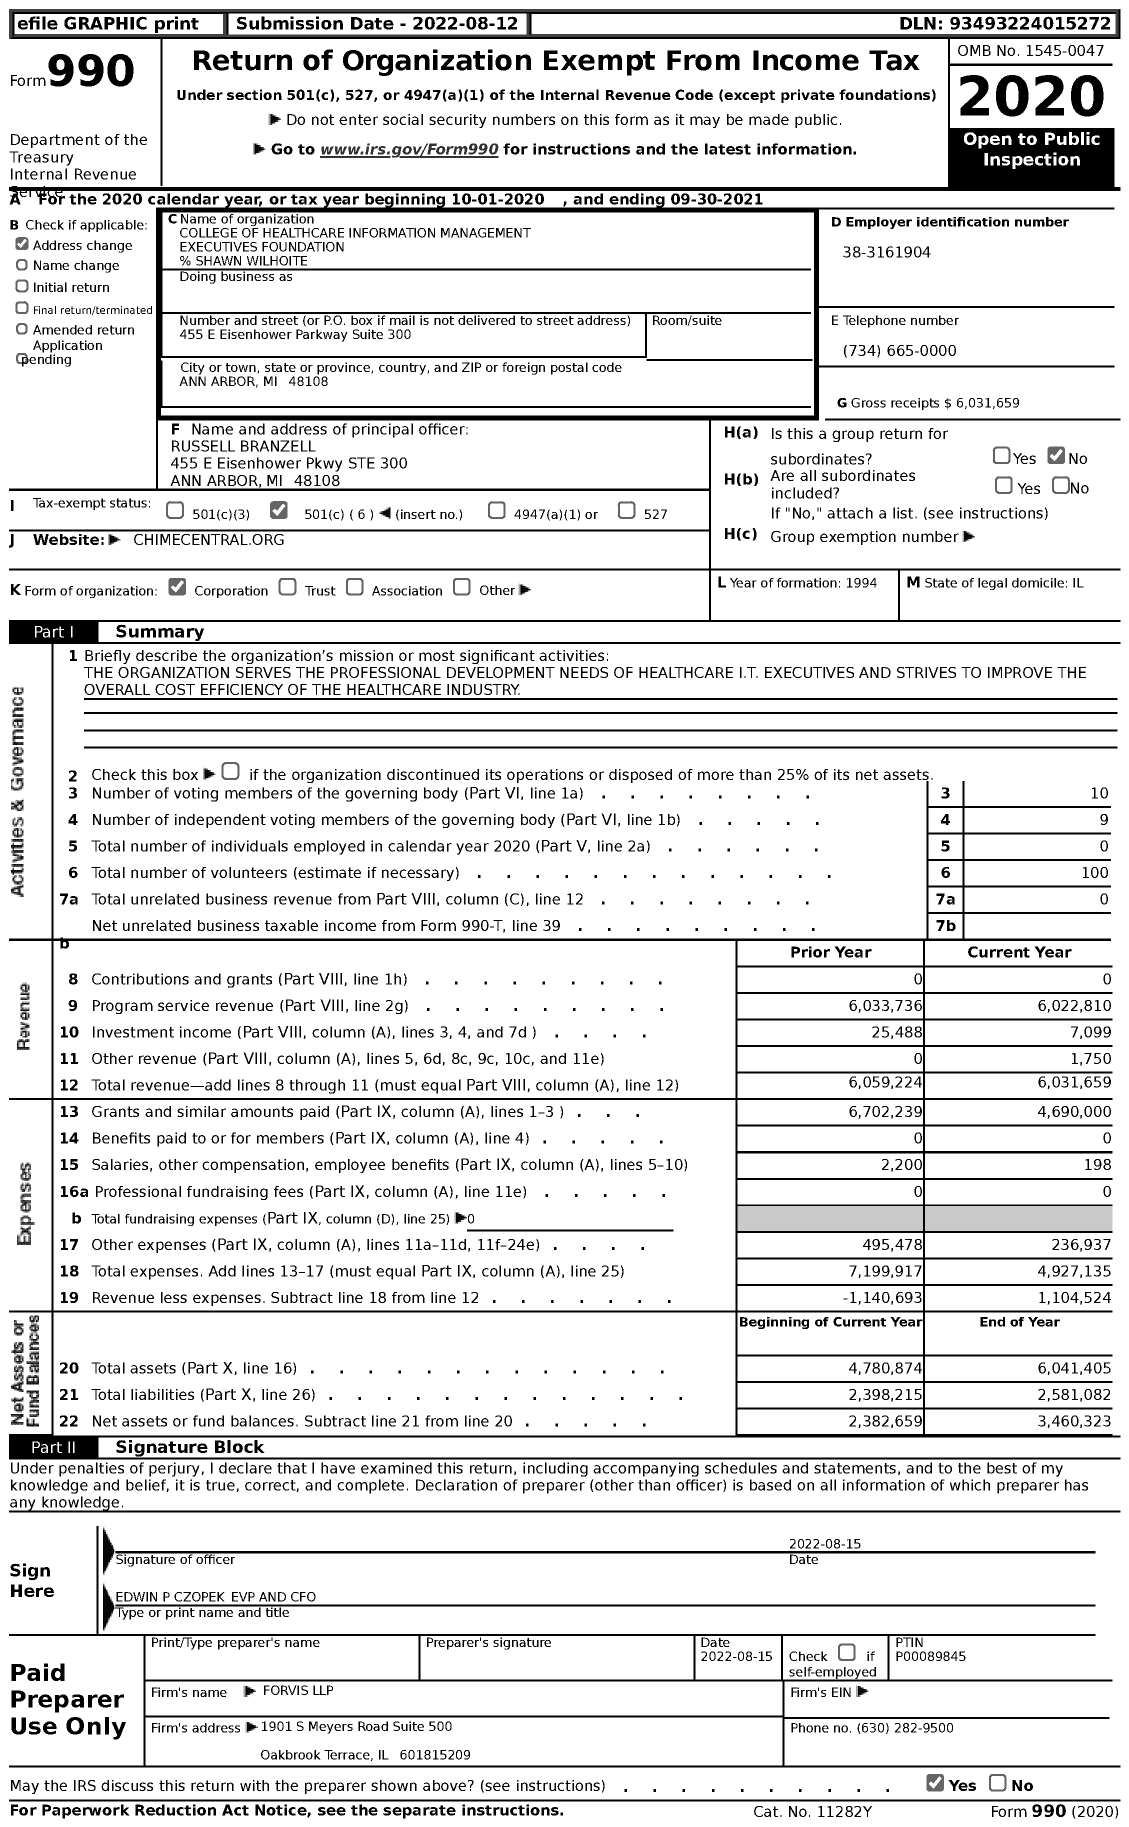 Image of first page of 2020 Form 990 for College of Healthcare Information Management Executives Foundation (CHIME)